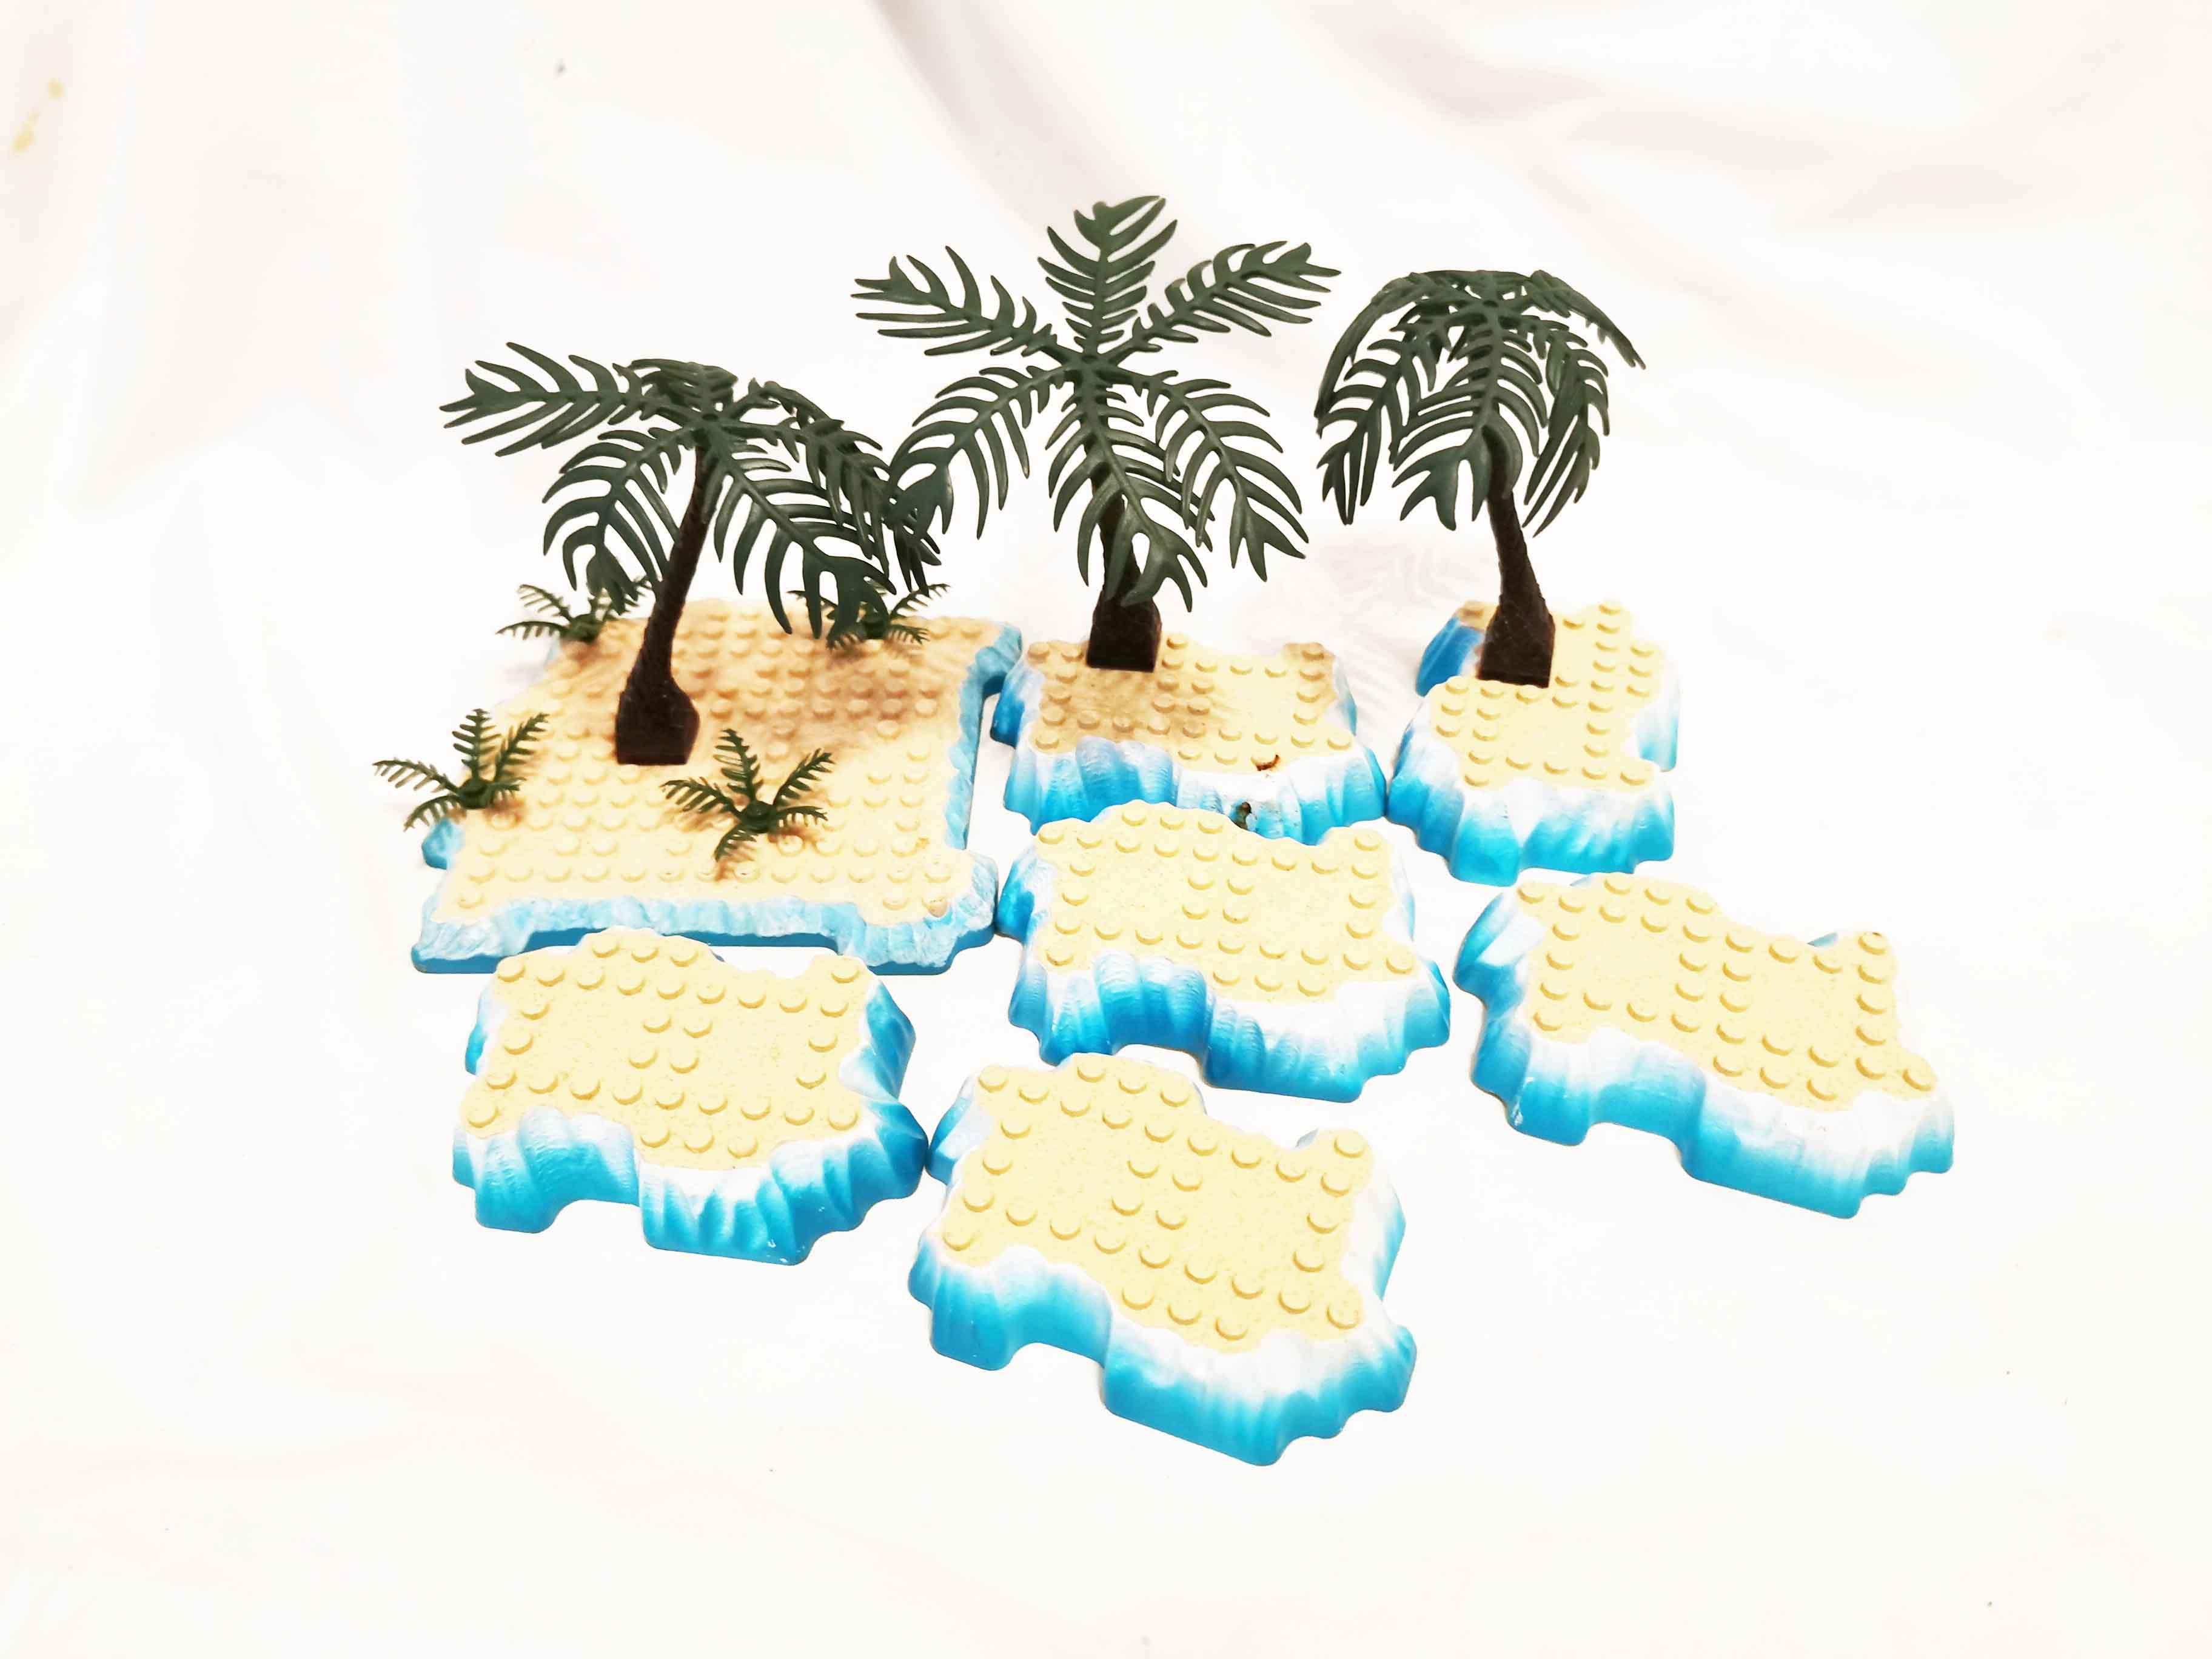 Mega Bloks Collection of Island Base Plates with Trees various sizes